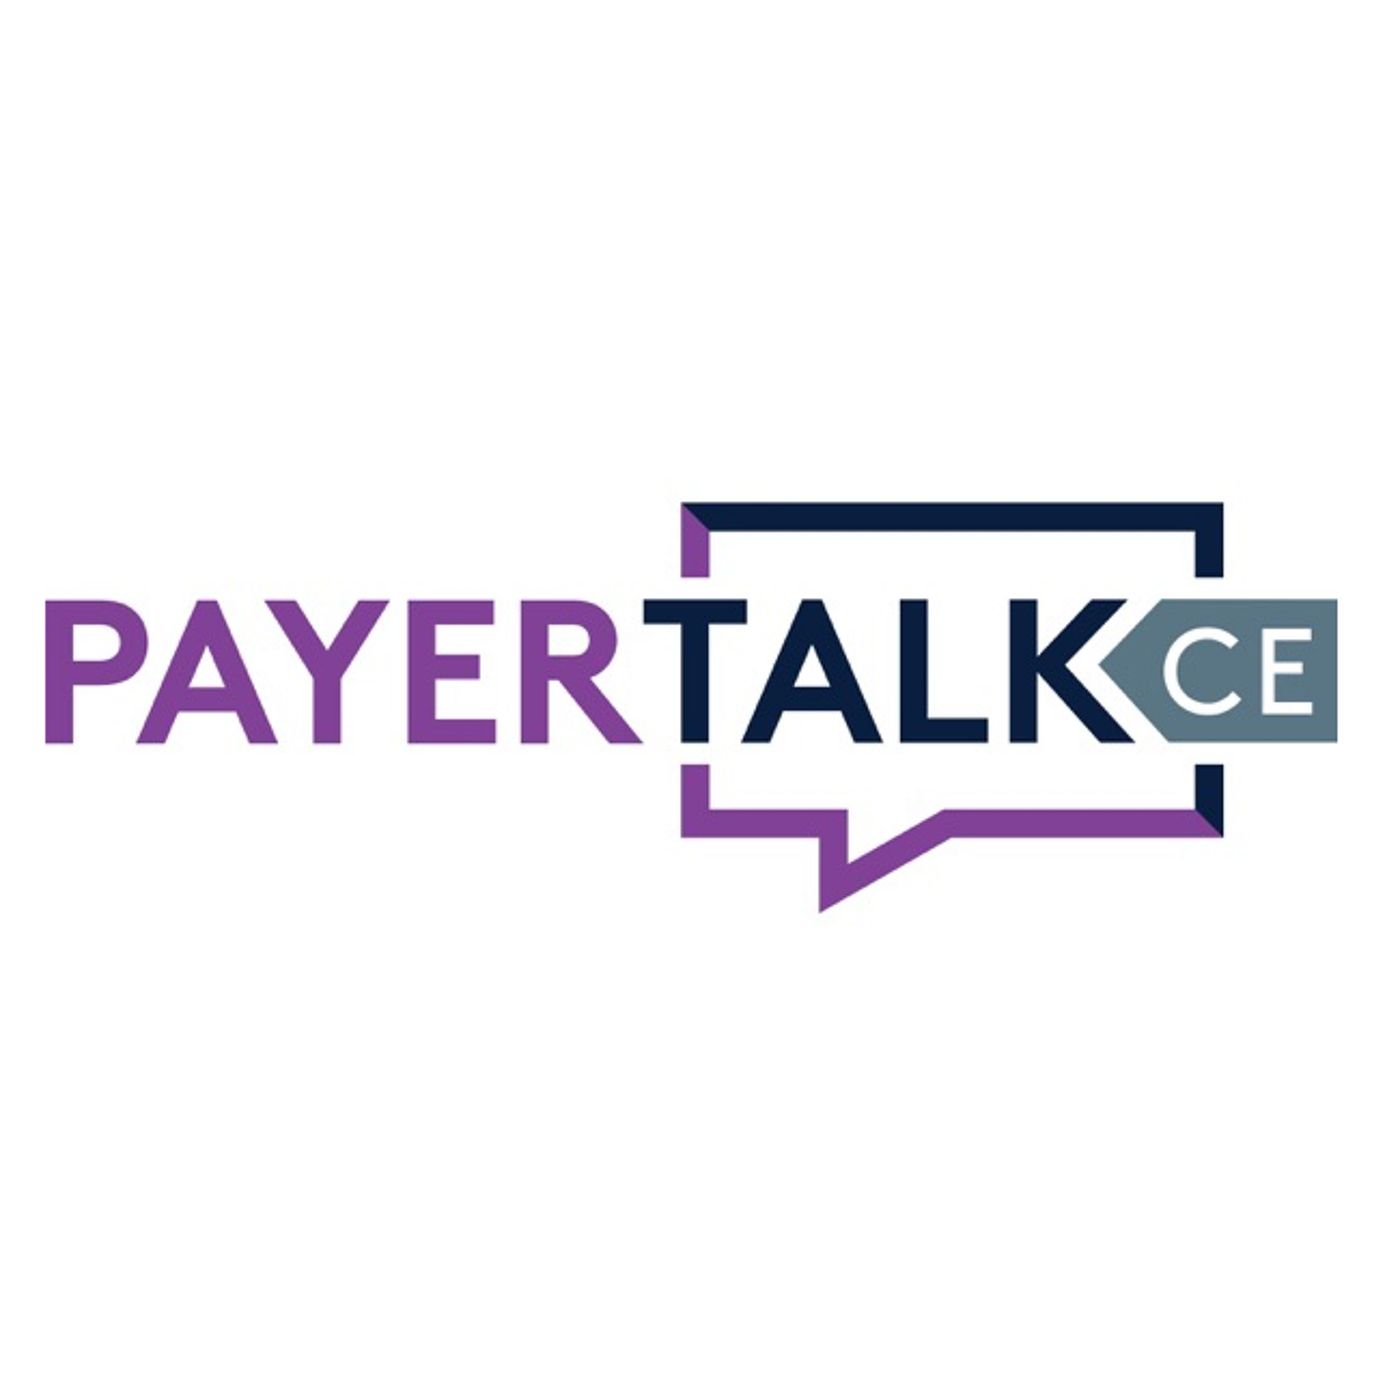 PayerTalkCE: Addressing Unmet Needs in AMD and DME